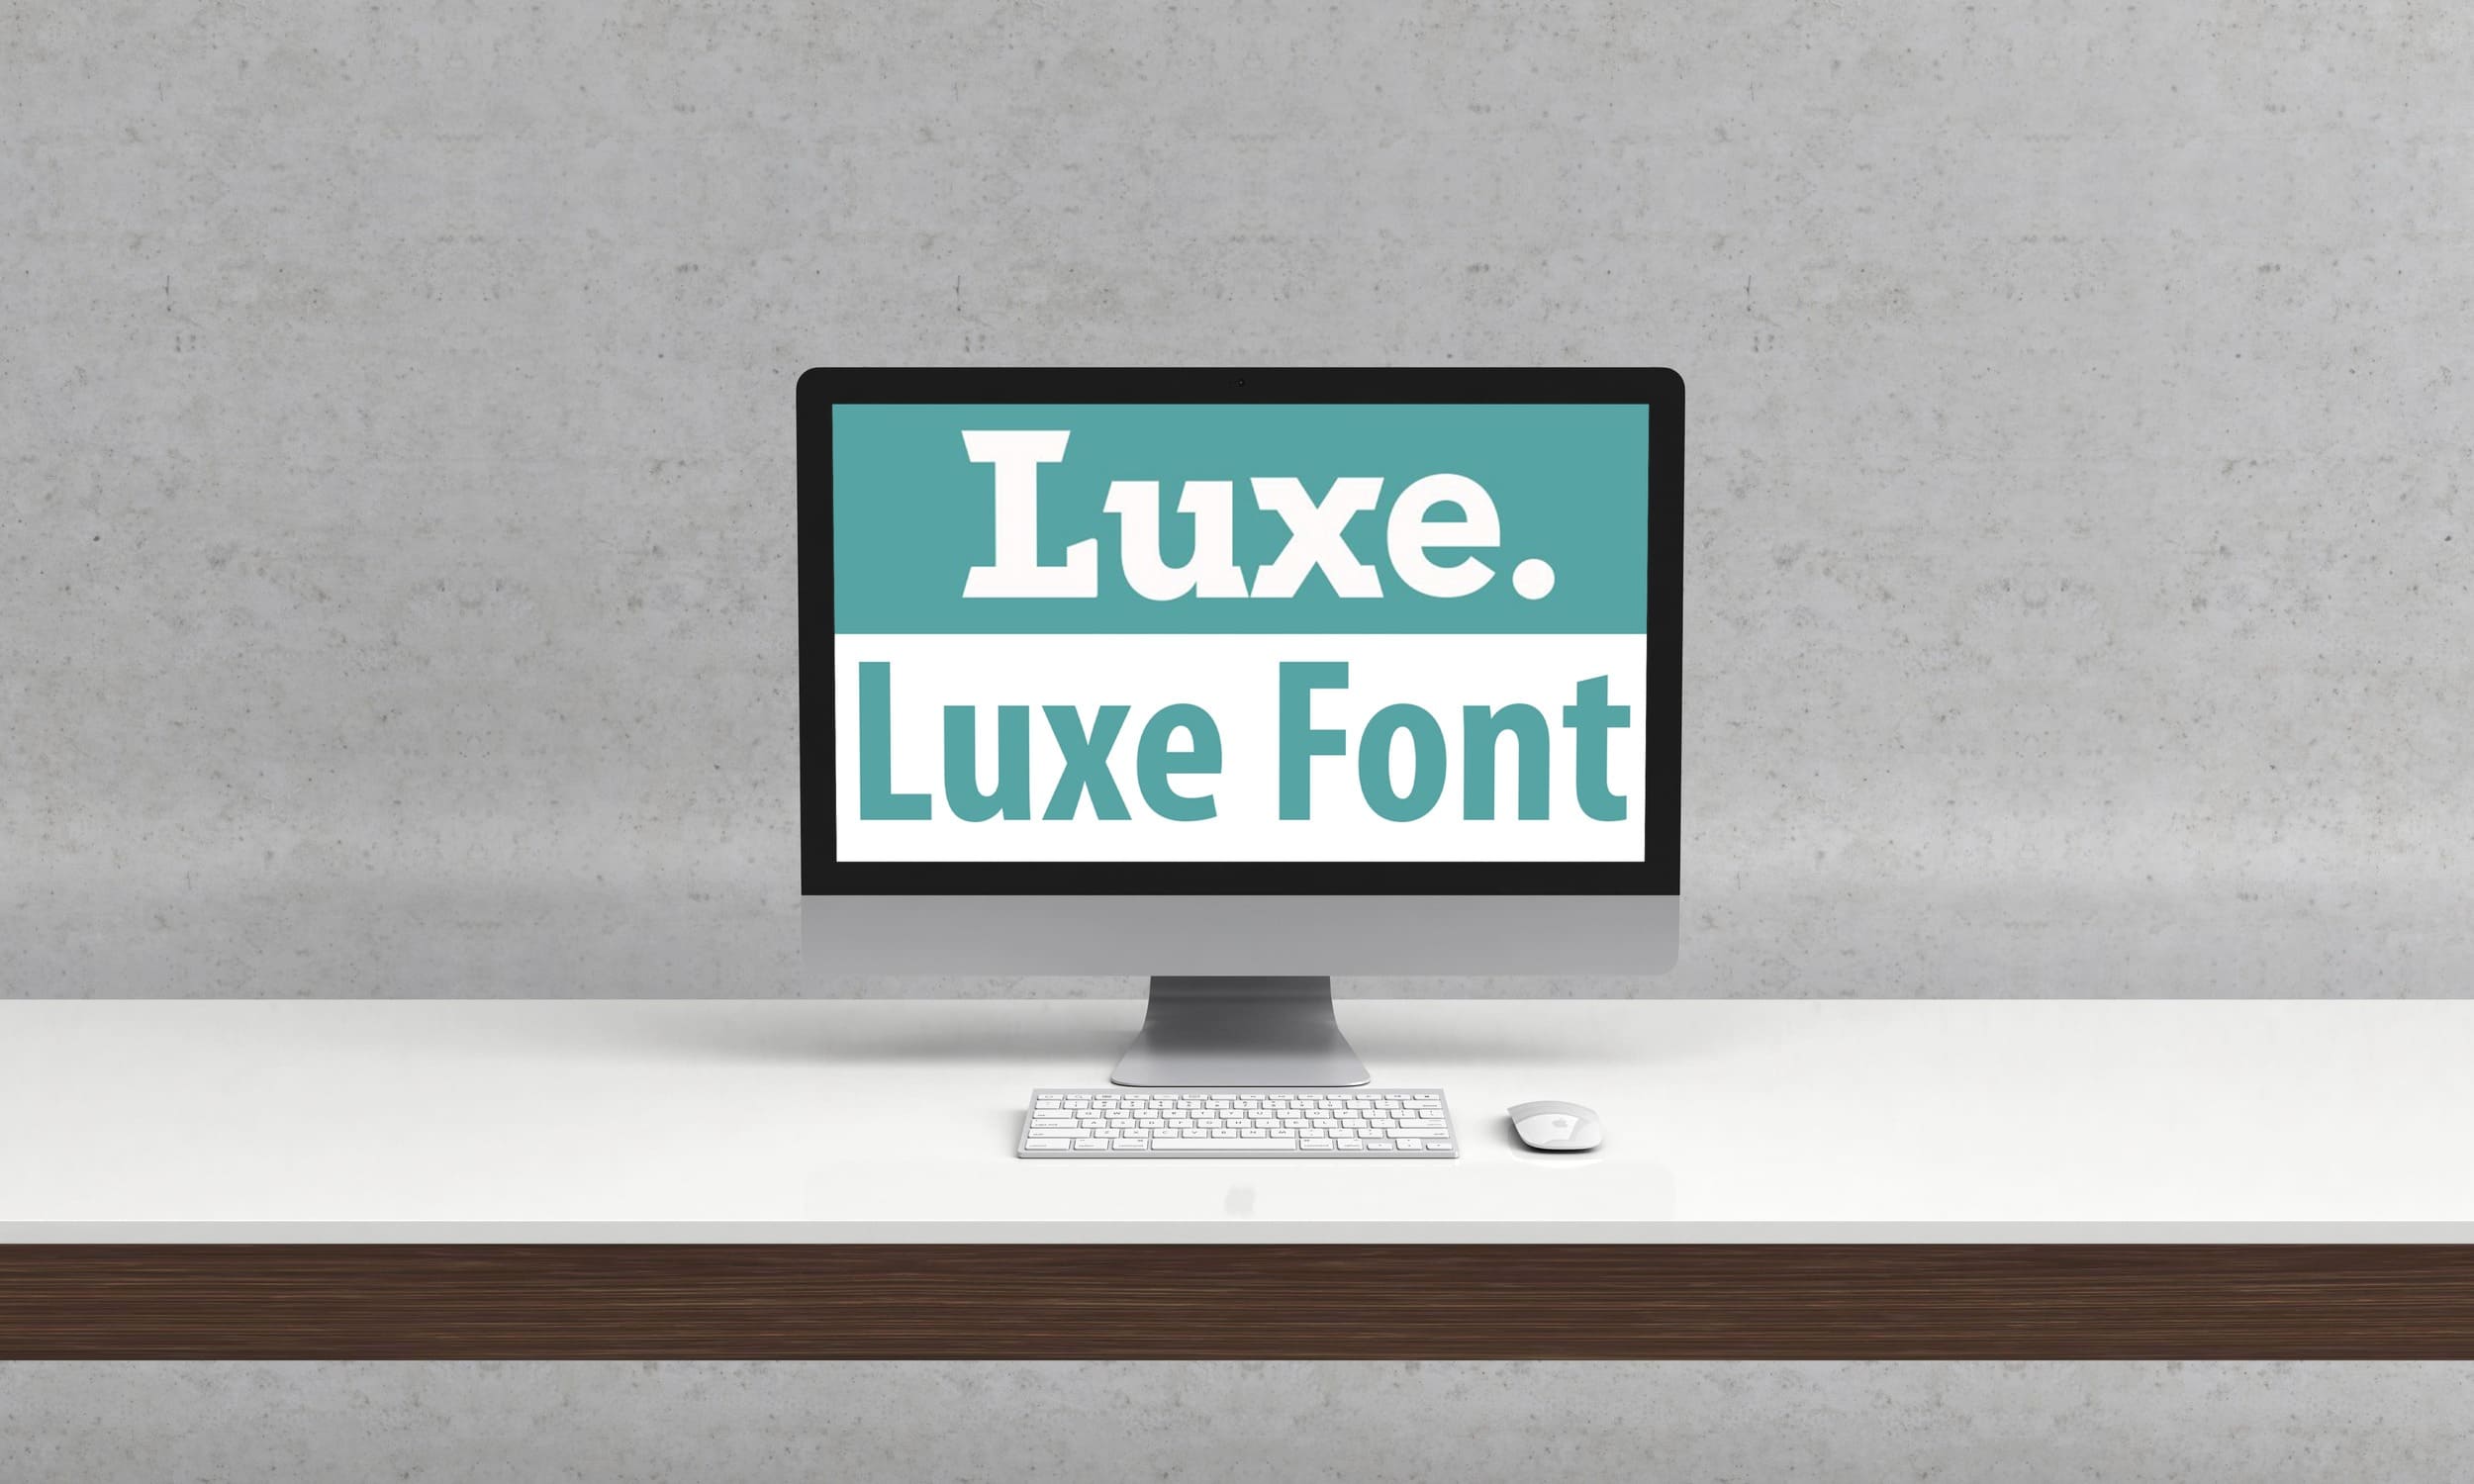 Luxe - Luxe Font On The Monoblock.